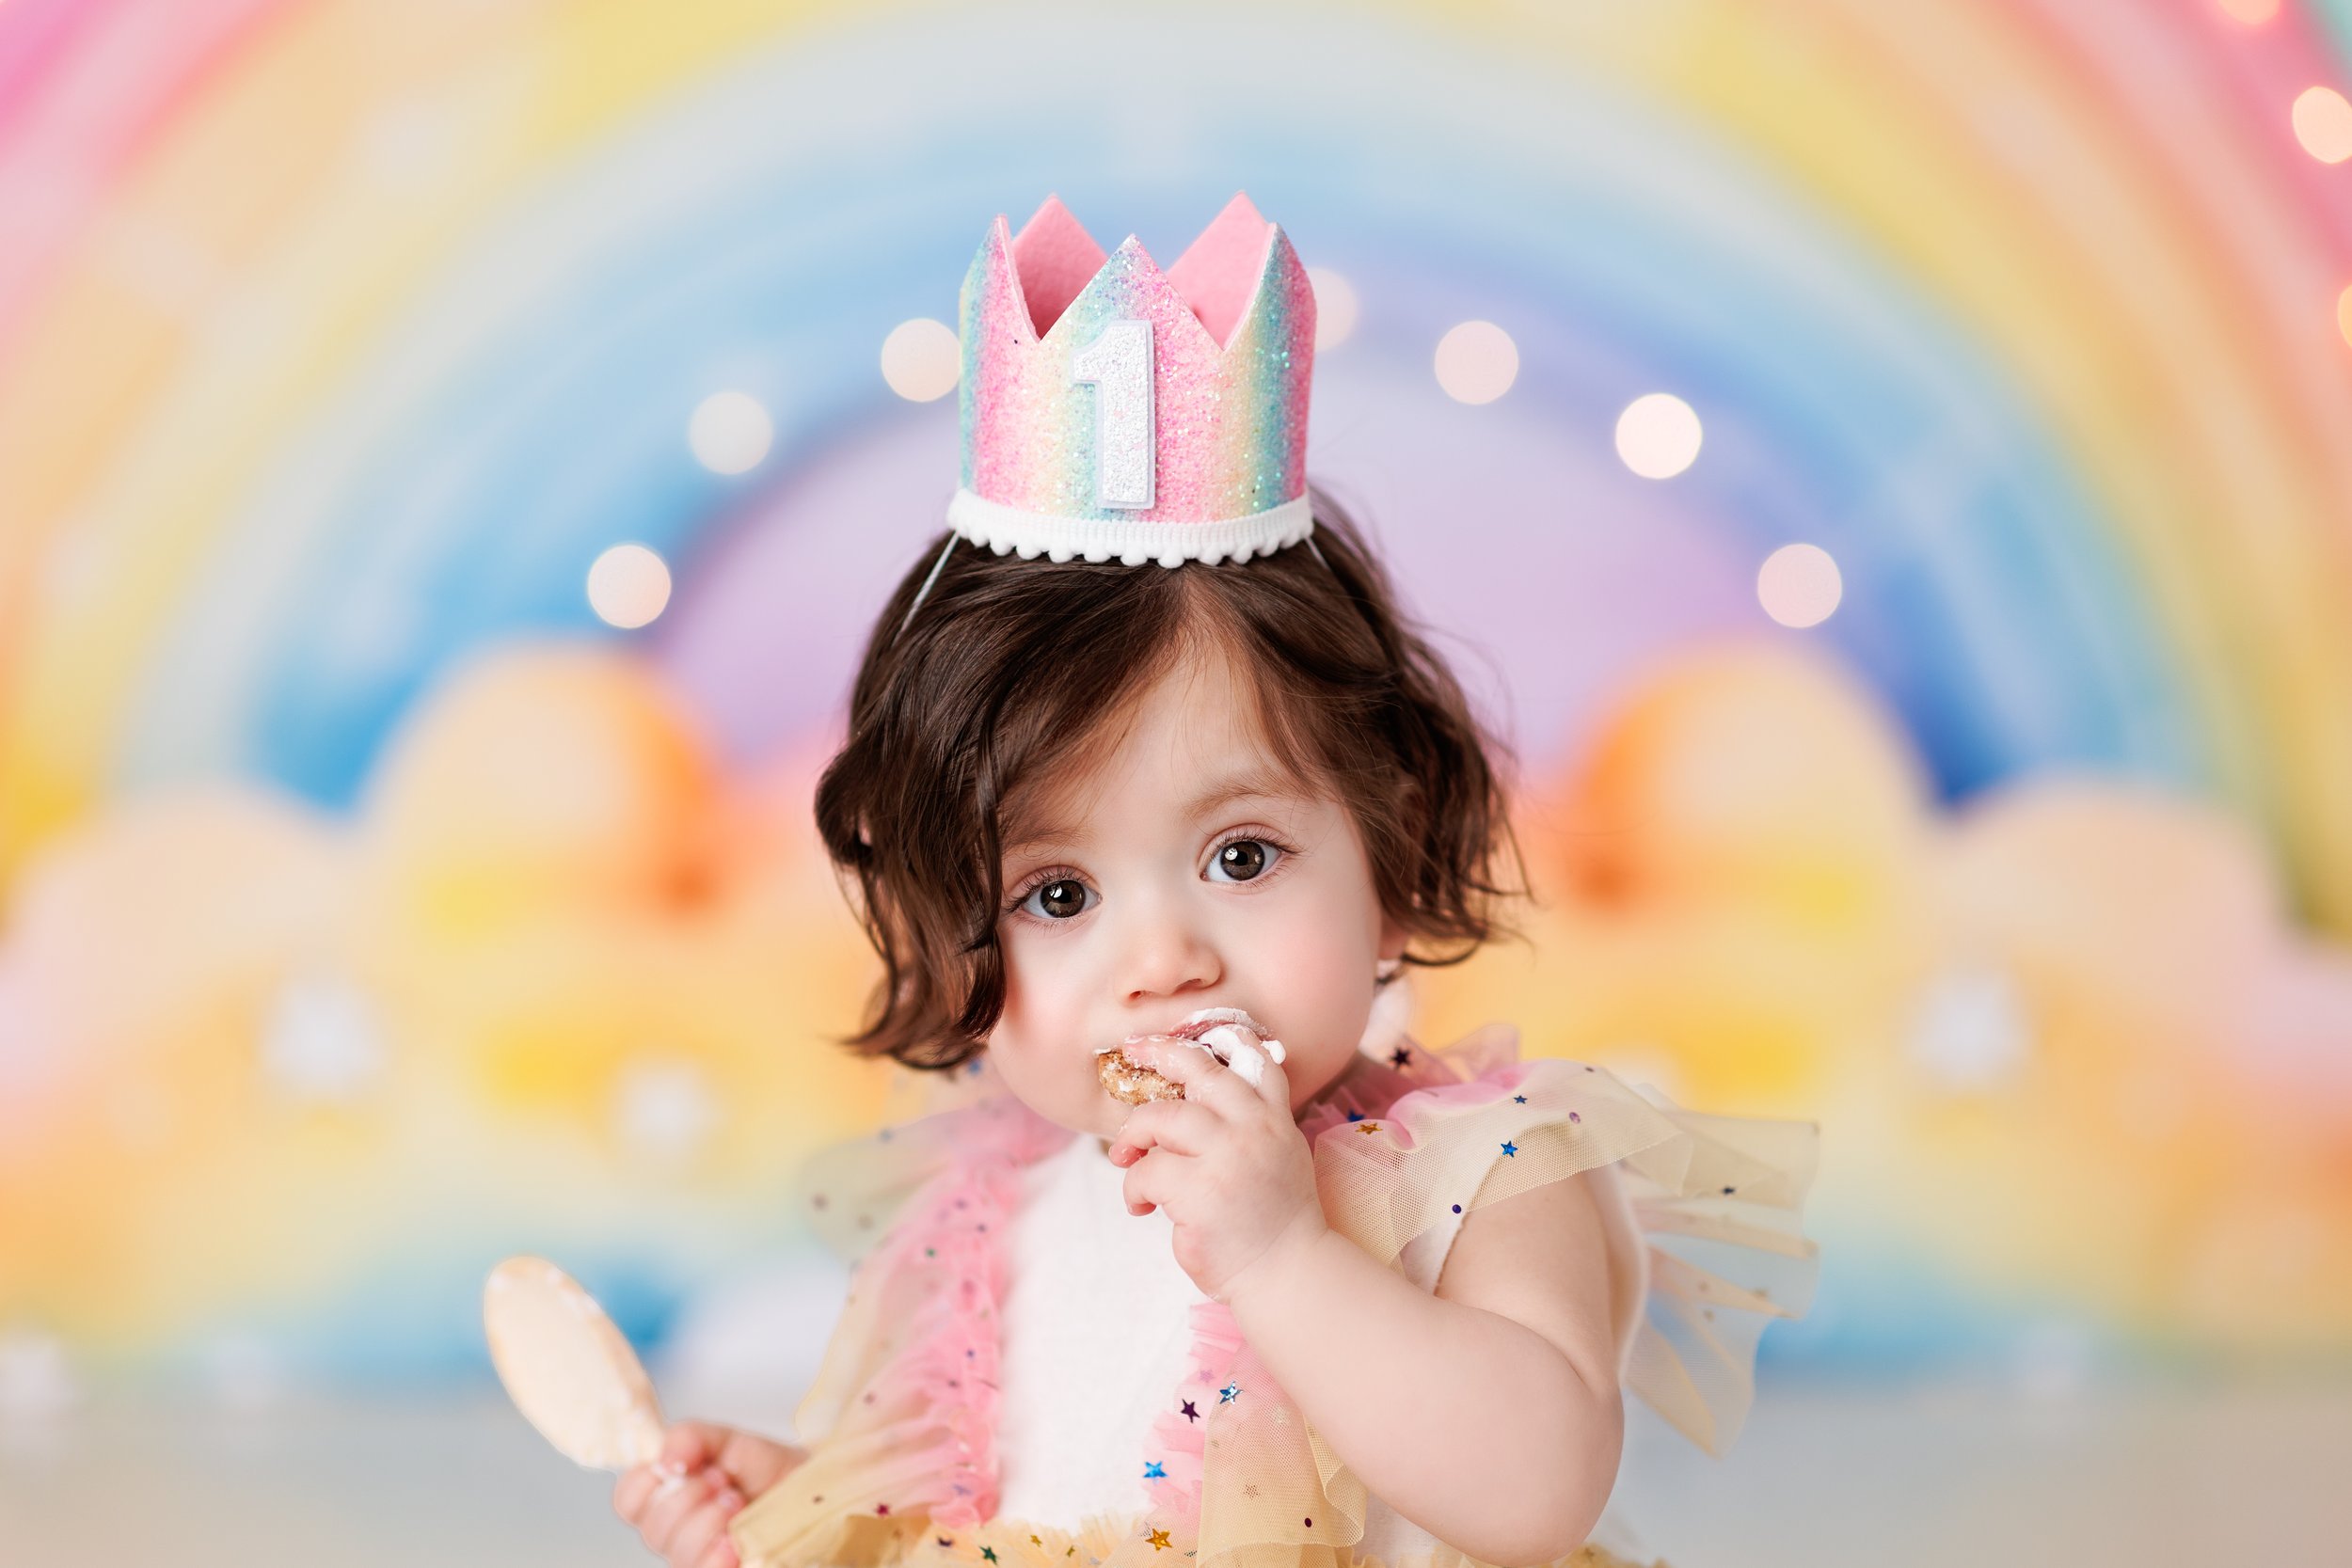  Toddler girl wearing a crown and licking icing off her fist during a rainbow themed cake smash 